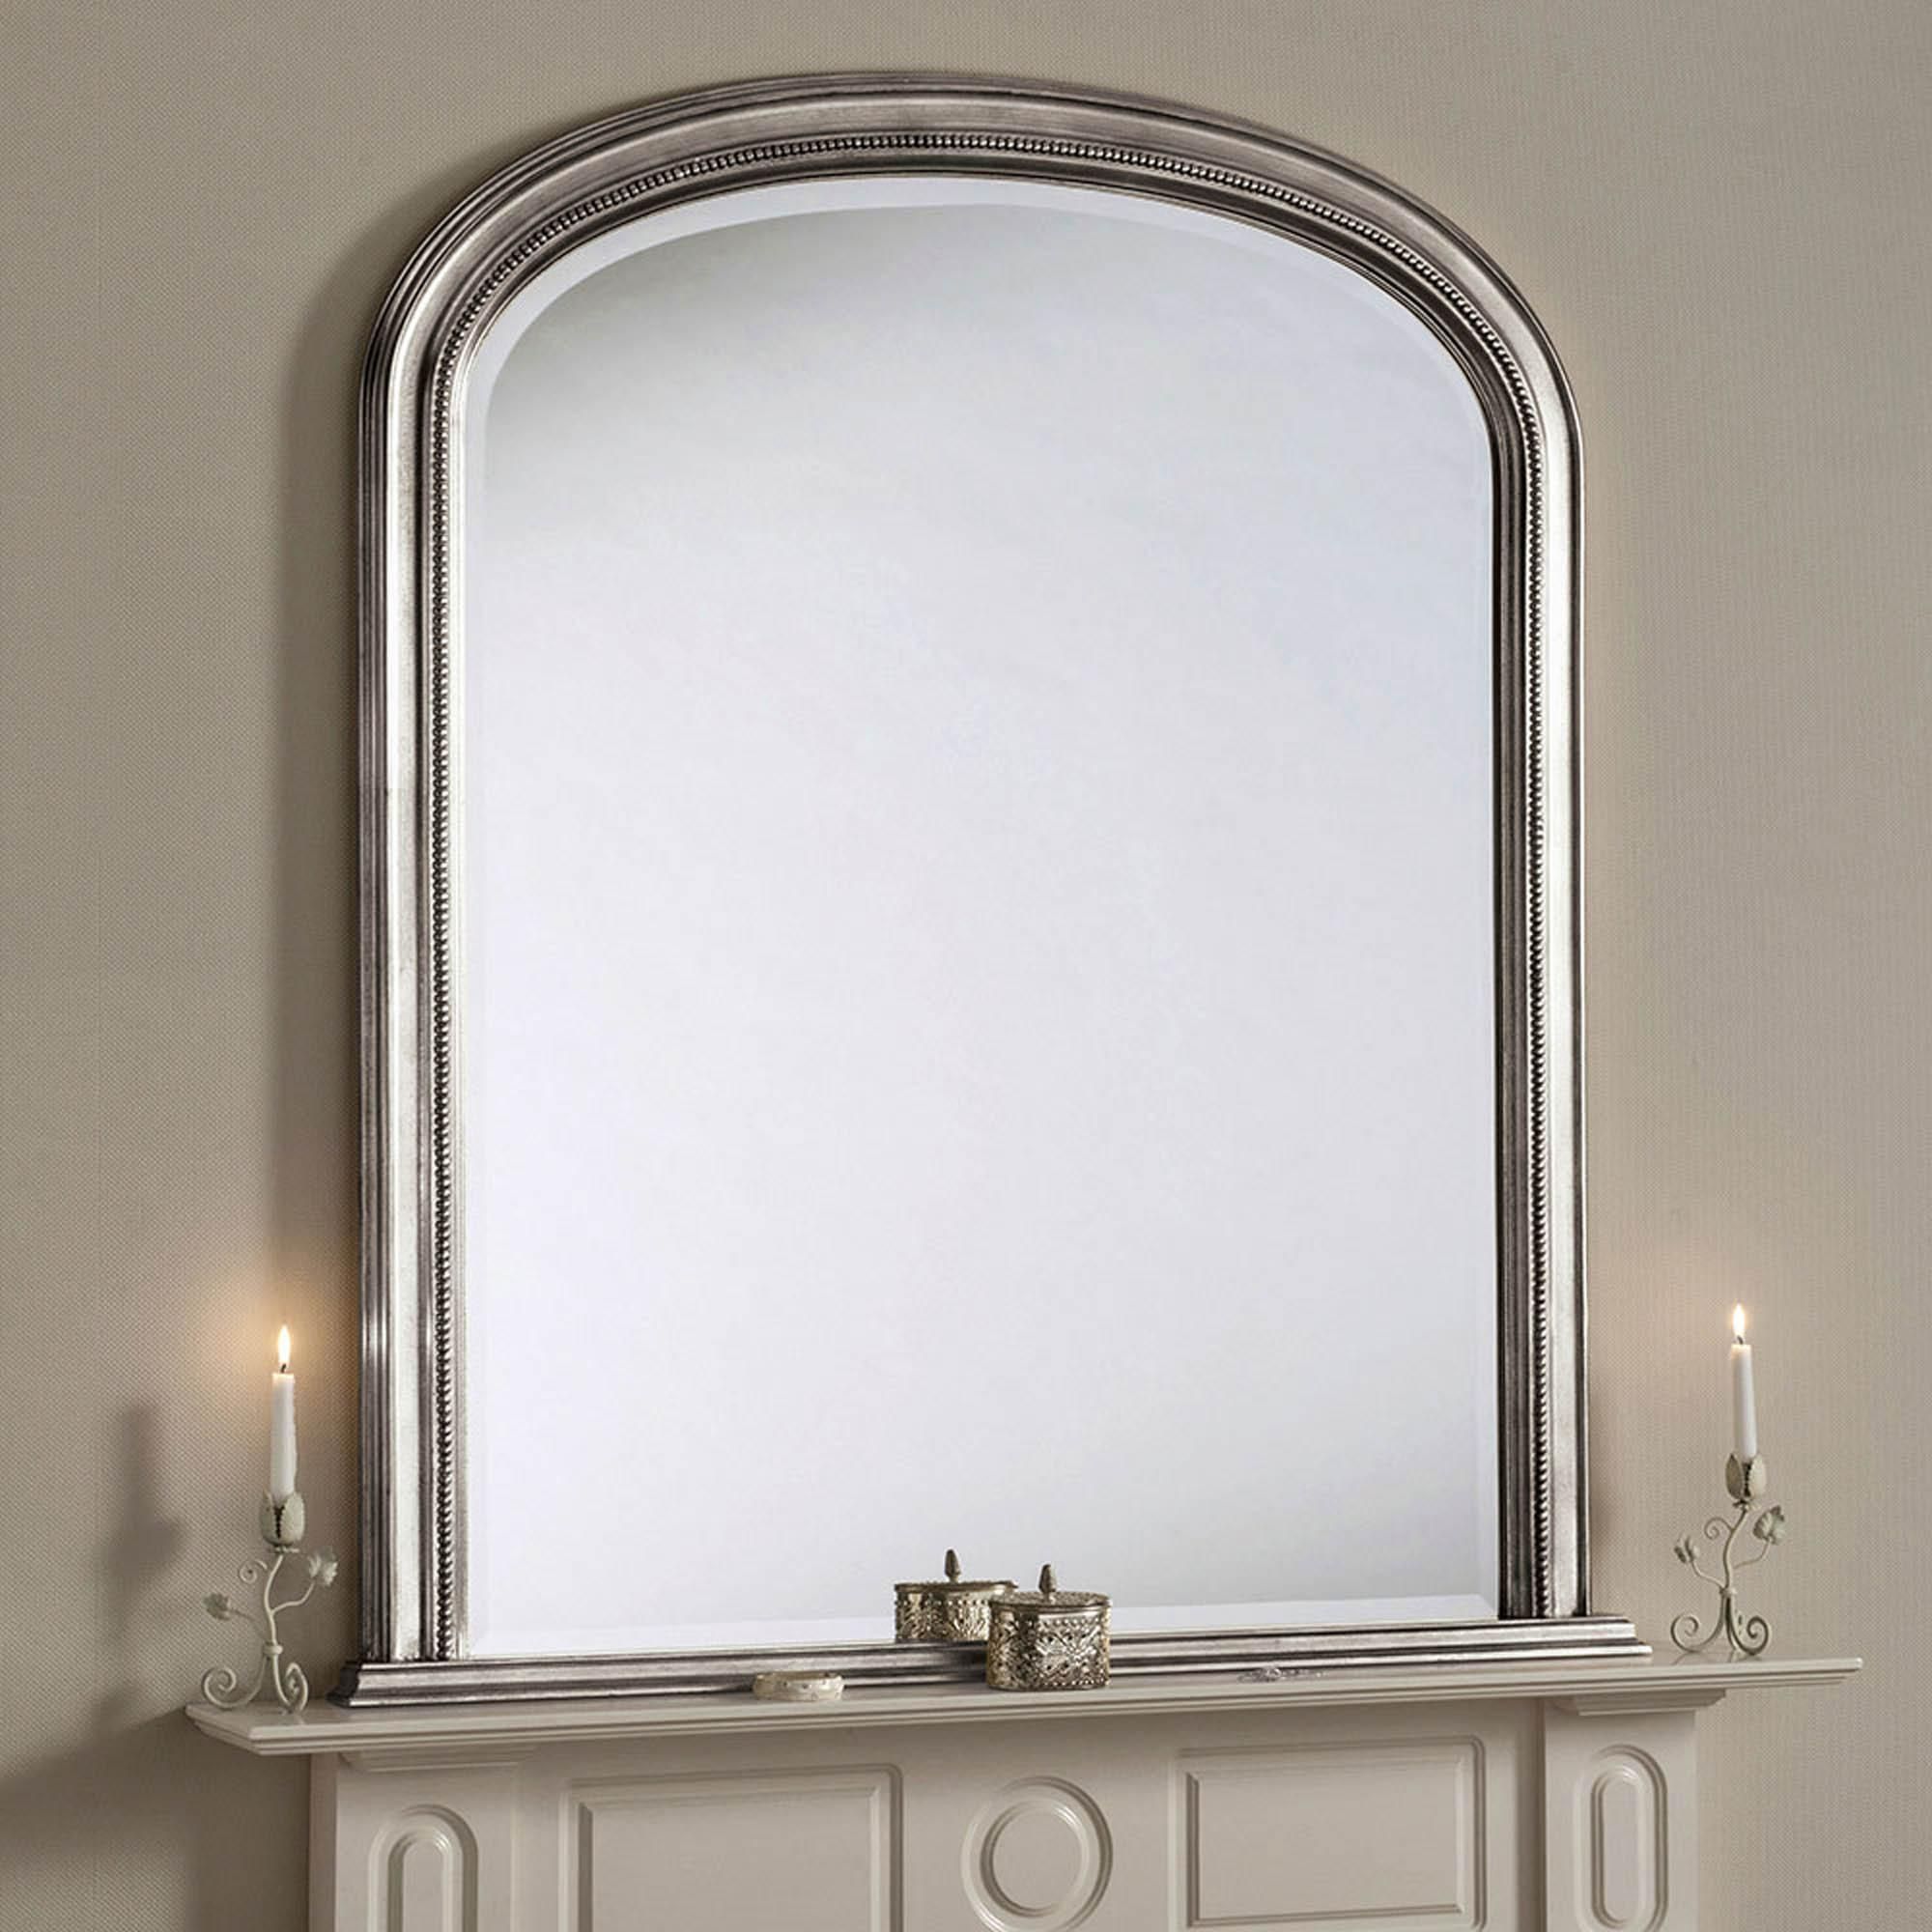 Yearn Beaded Mantle Mirror Silver In 2020 | Overmantle Mirror, Mantle For Vassallo Beaded Bronze Beveled Wall Mirrors (View 2 of 15)